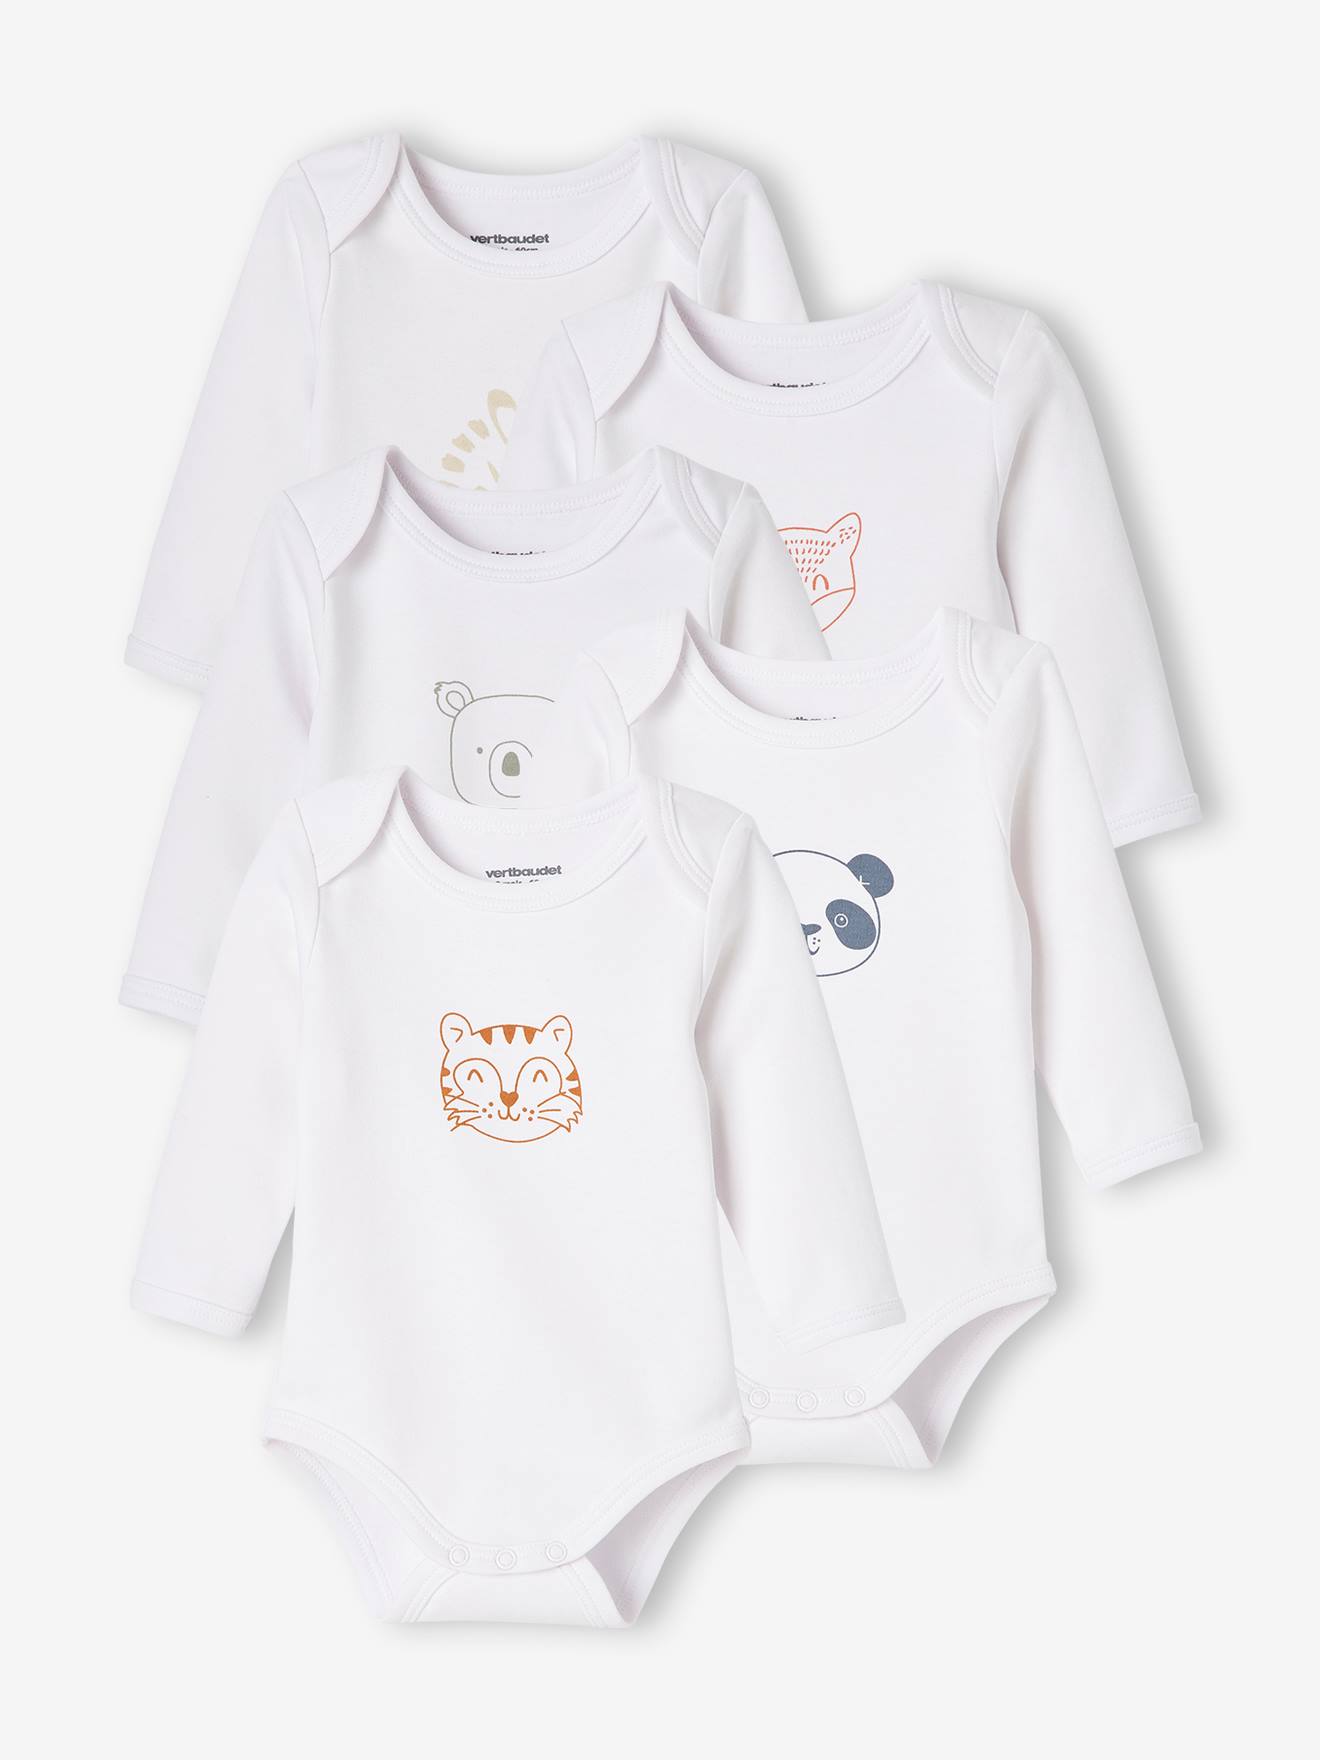 Pack of 5 Animals Long Sleeve Bodysuits for Newborn Babies, Cutaway  Shoulders - white light two color/multicol, Baby